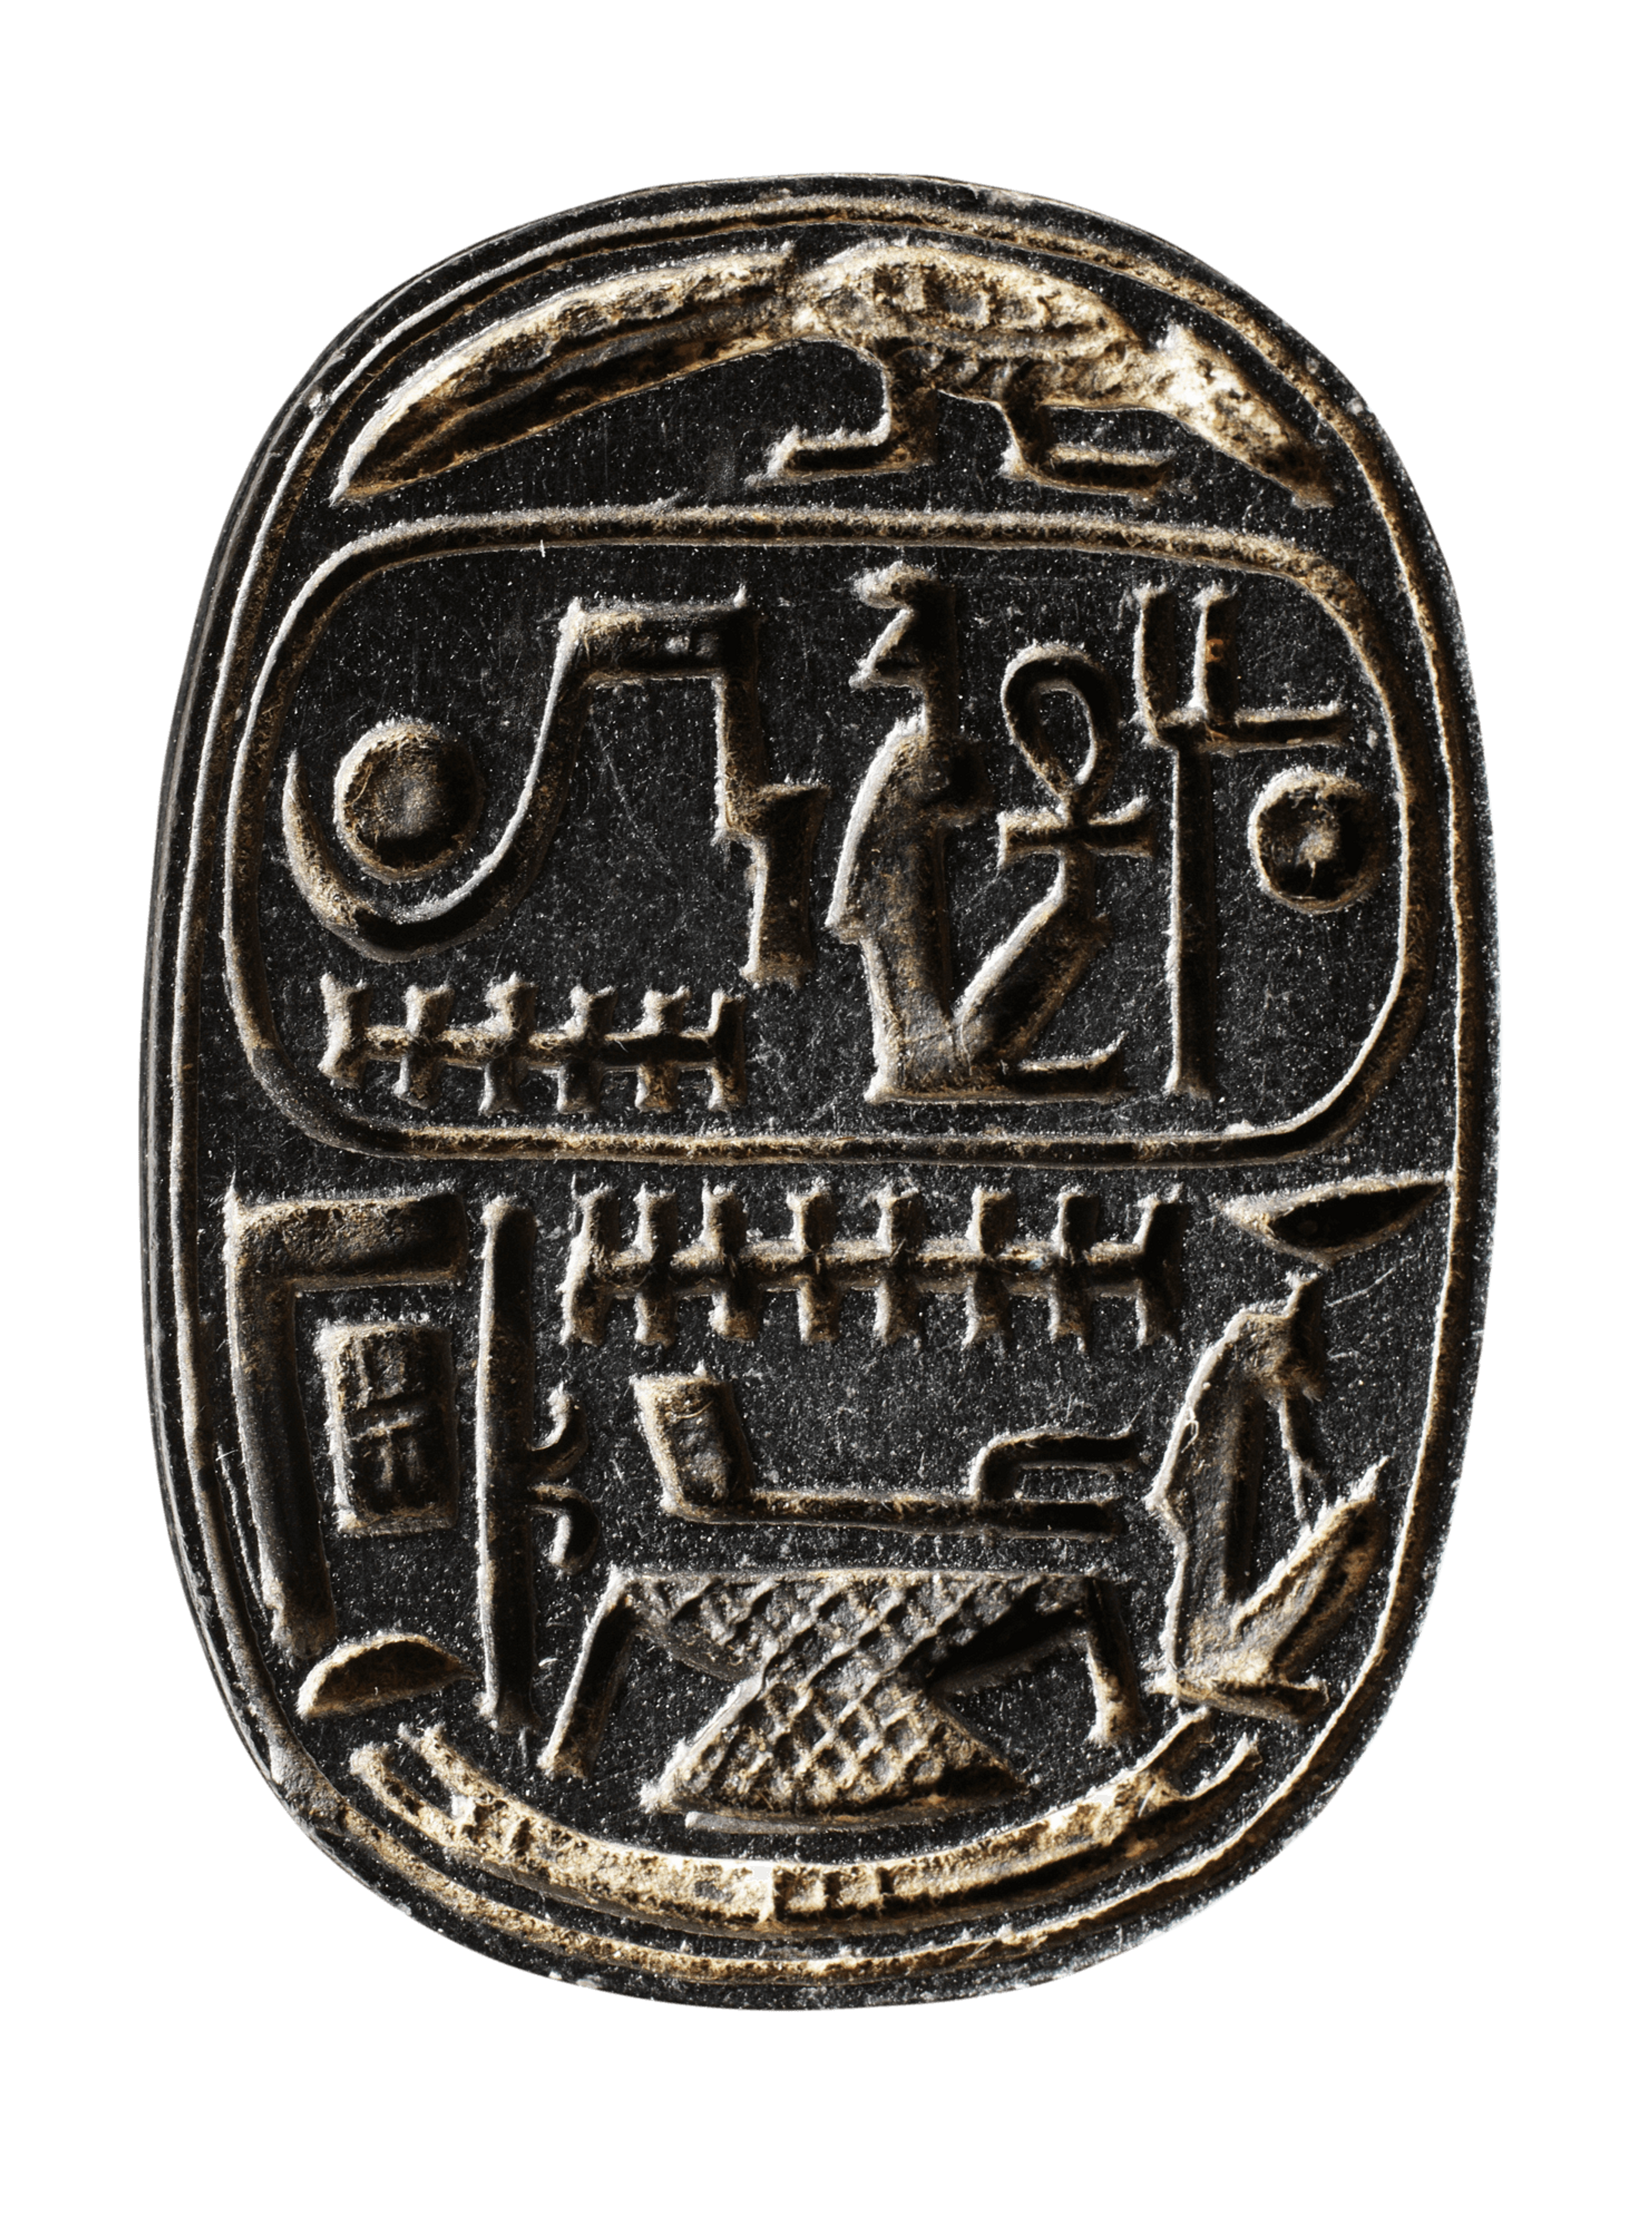 Scarab with the pre-name of Ramesses II